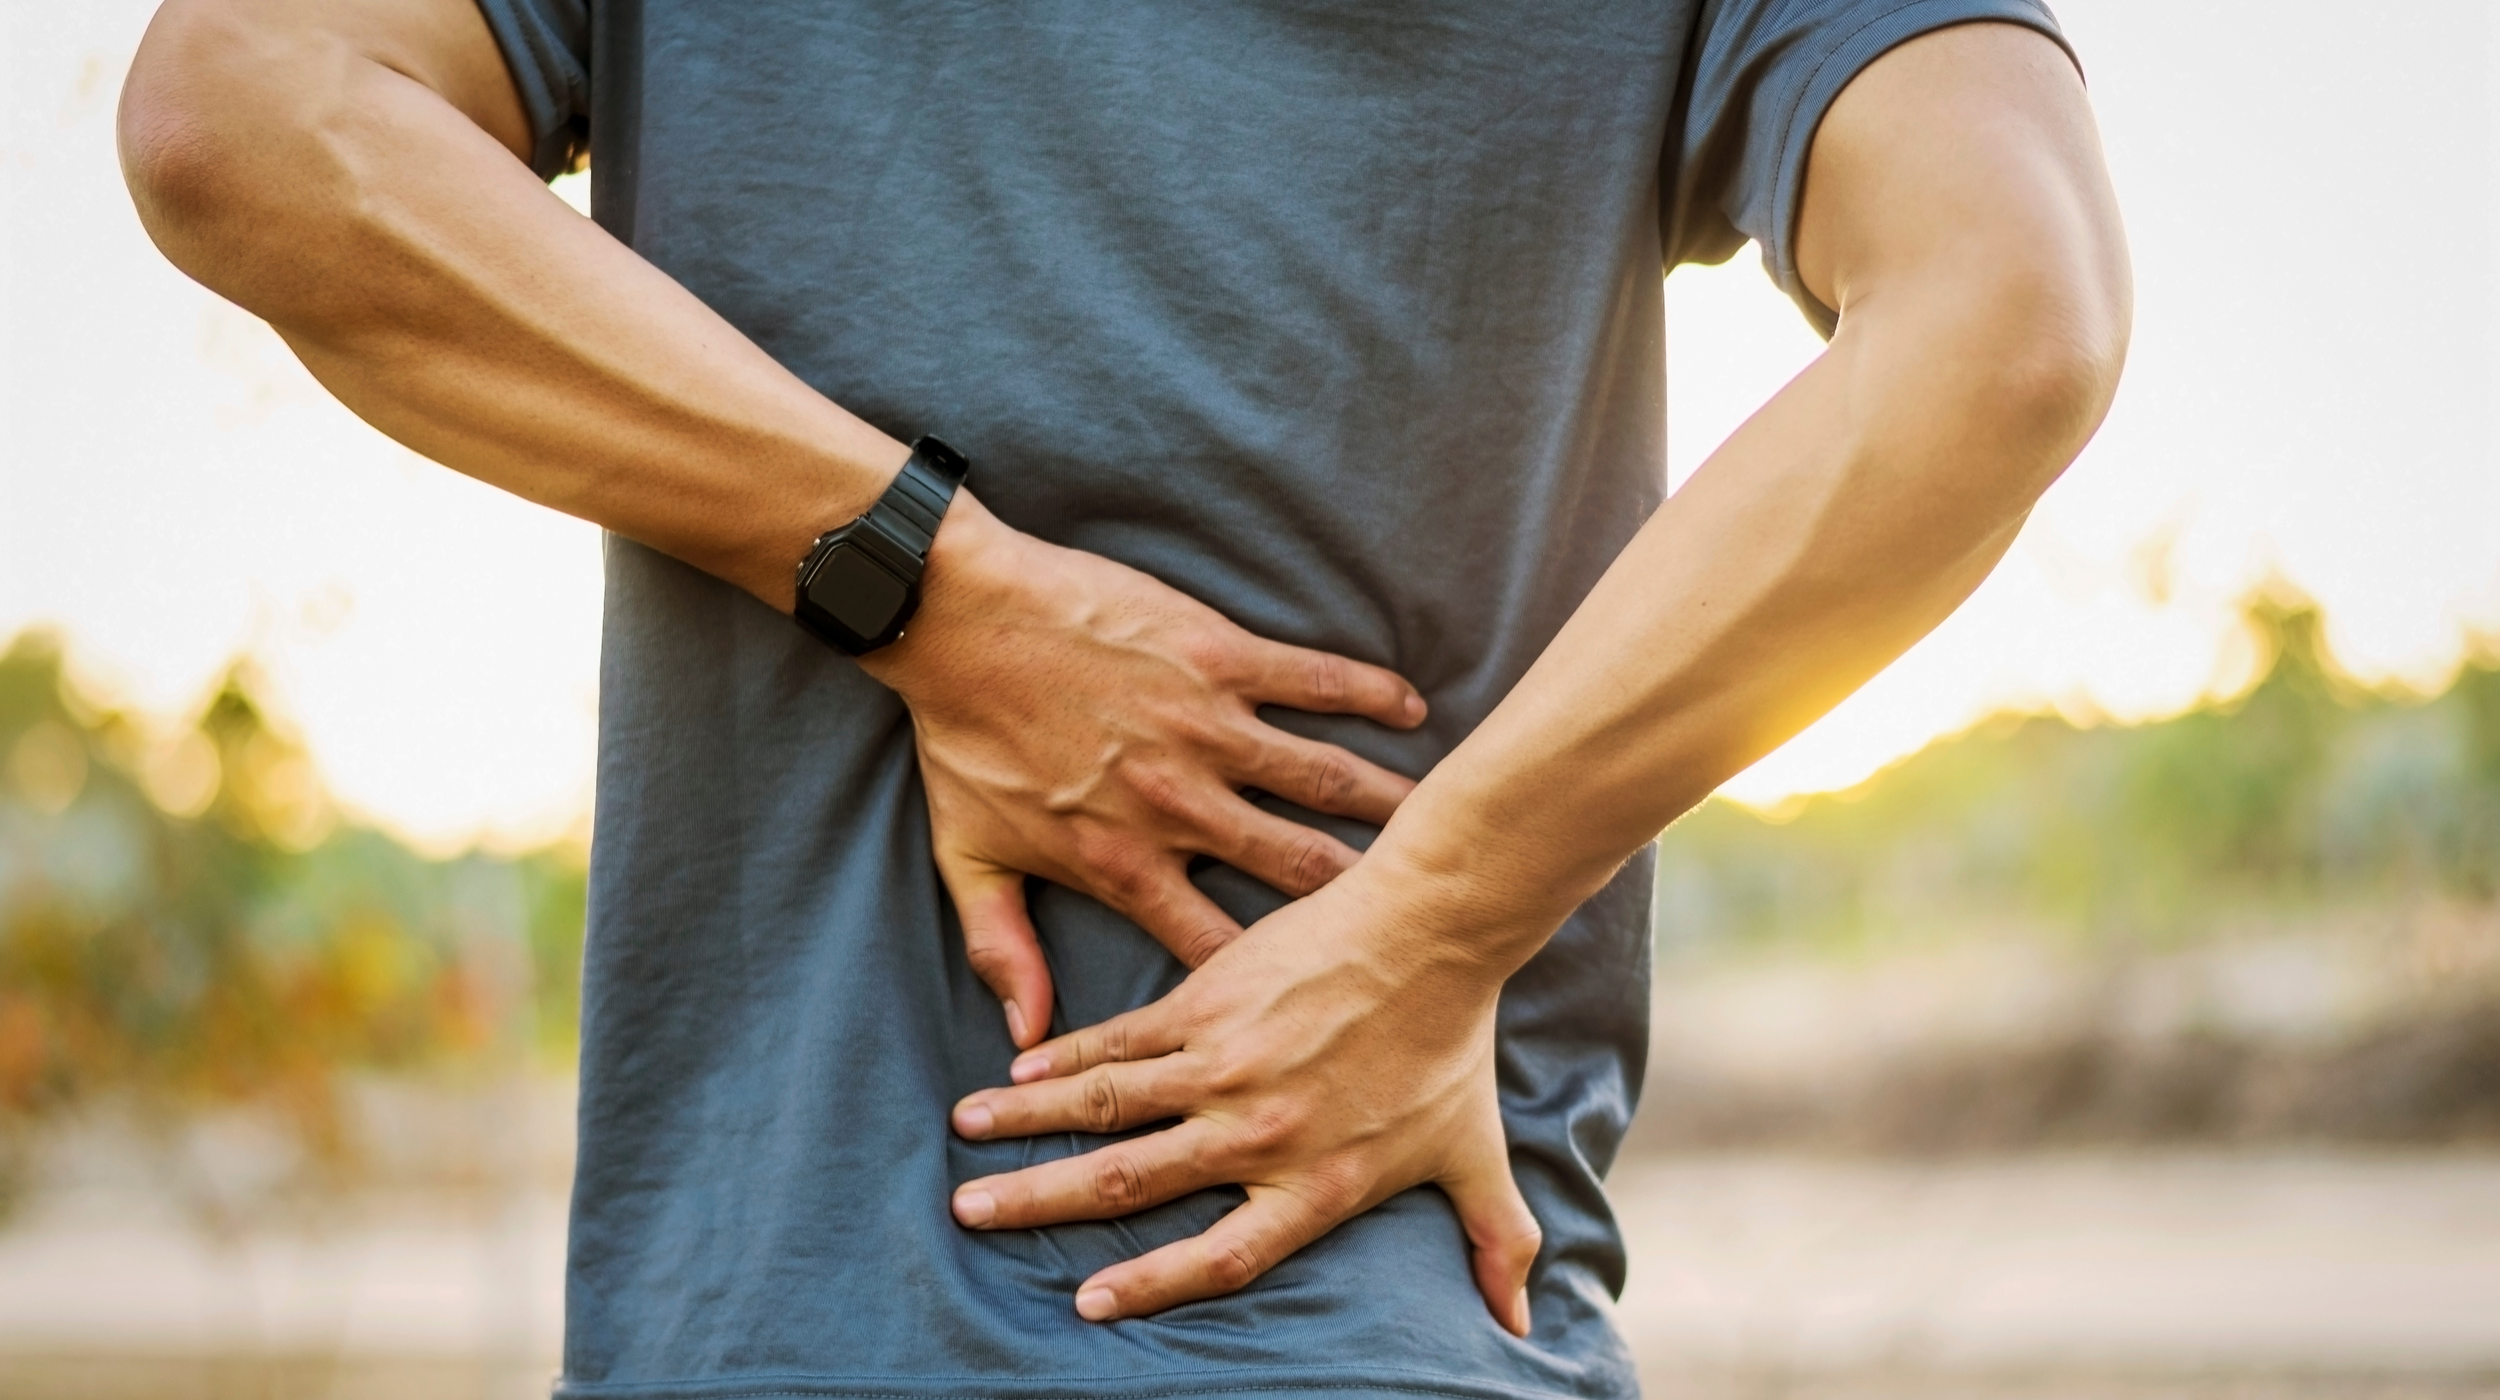 Why Massage and Chiropractic Adjustments Don’t Fix Back Pain